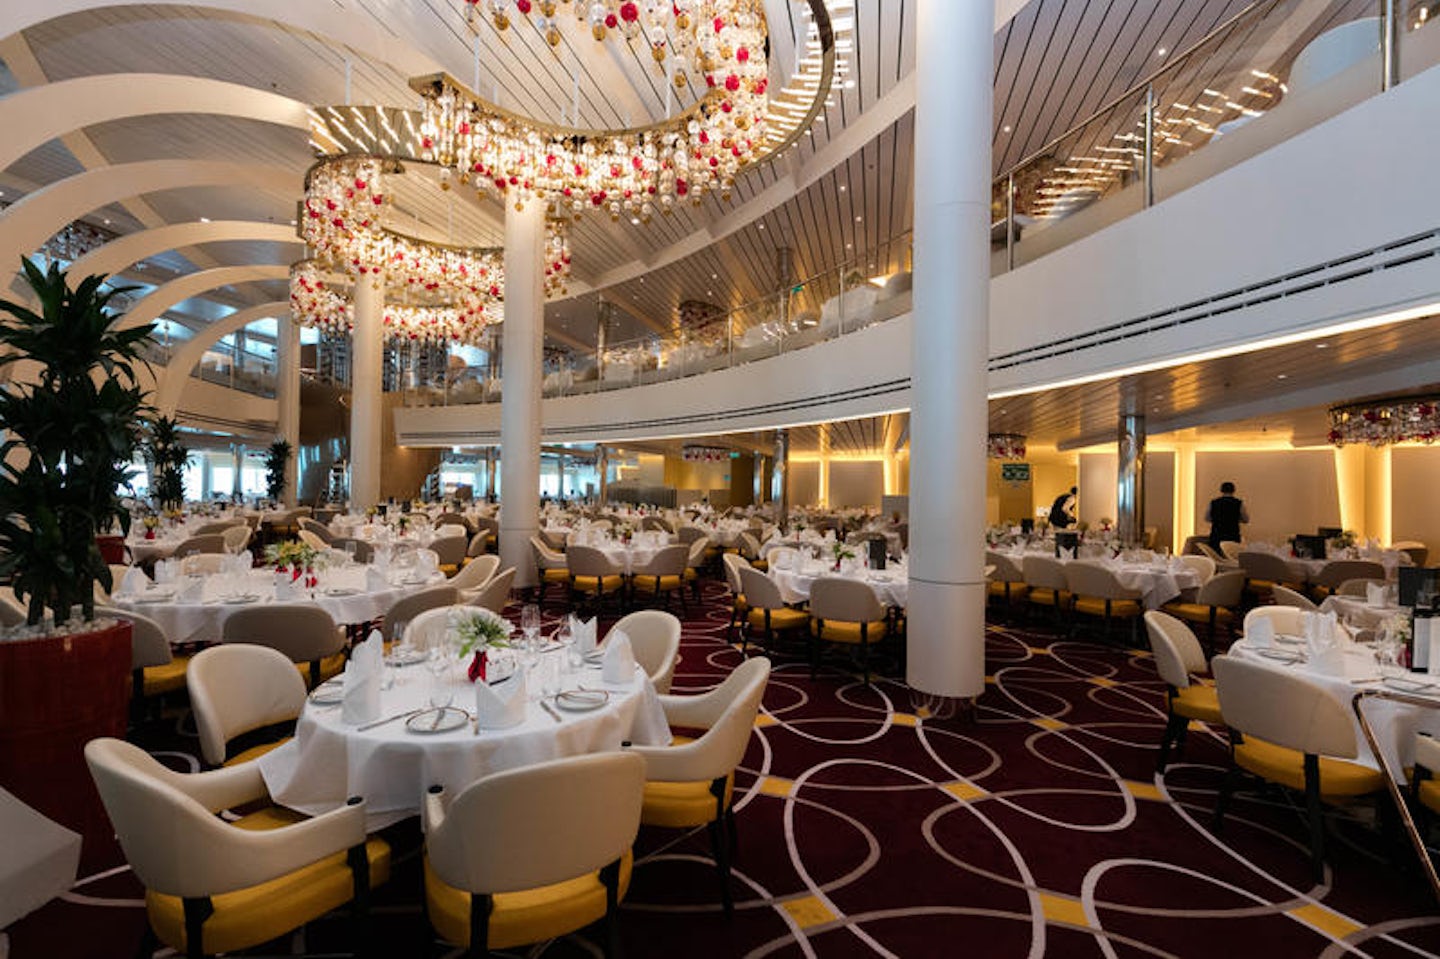 Koningsdam Dining Room Reservations In Advance